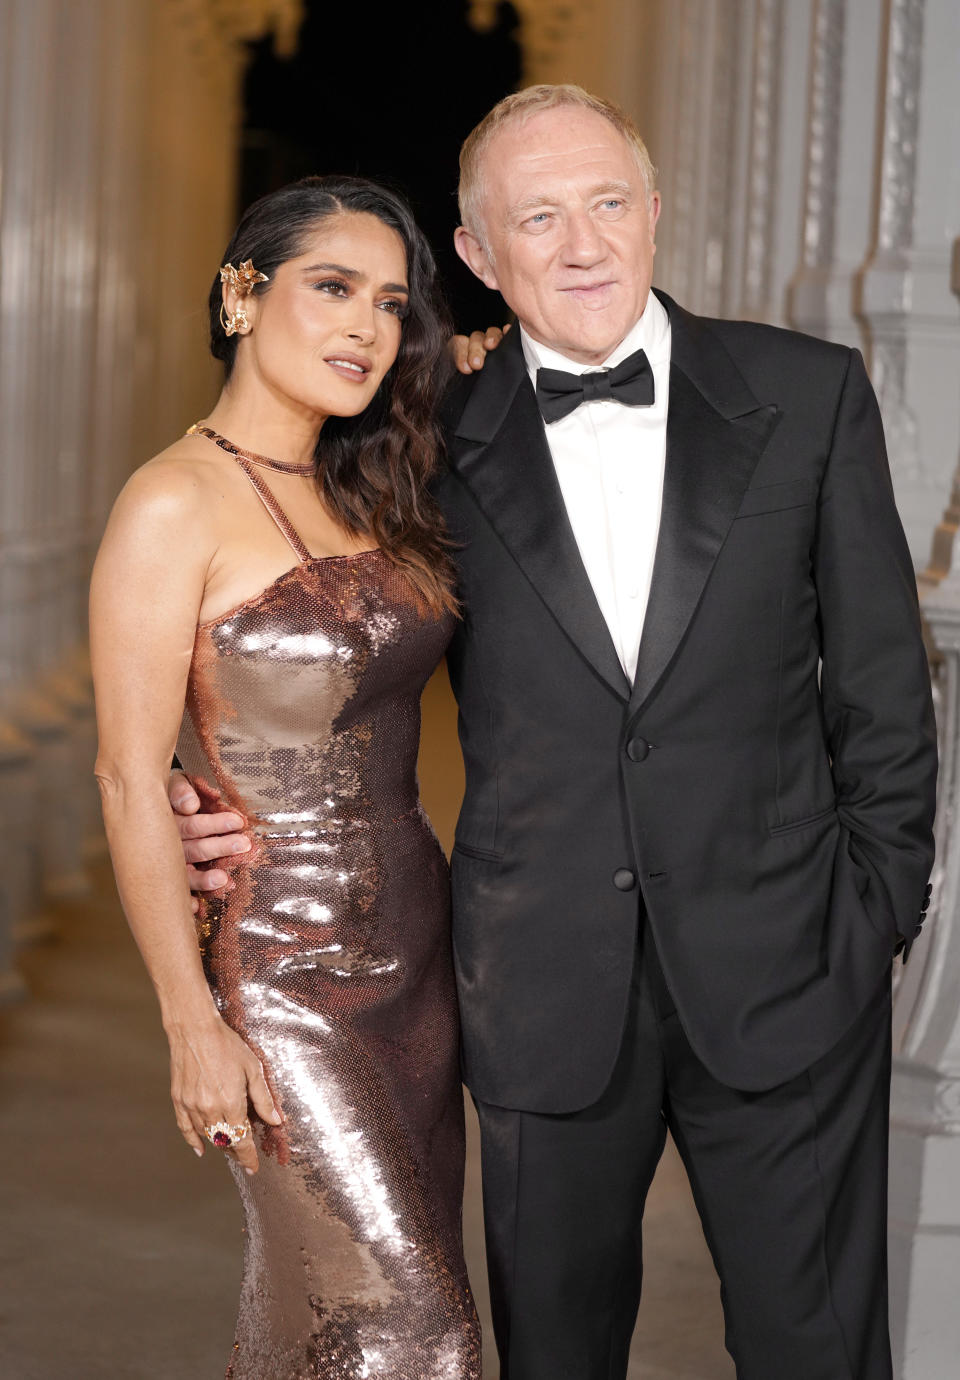 LOS ANGELES, CALIFORNIA - NOVEMBER 04: (L-R) Salma Hayek, wearing Gucci, and François-Henri Pinault attend the 2023 LACMA Art+Film Gala, Presented By Gucci at Los Angeles County Museum of Art on November 04, 2023 in Los Angeles, California. (Photo by Presley Ann/Getty Images for LACMA)